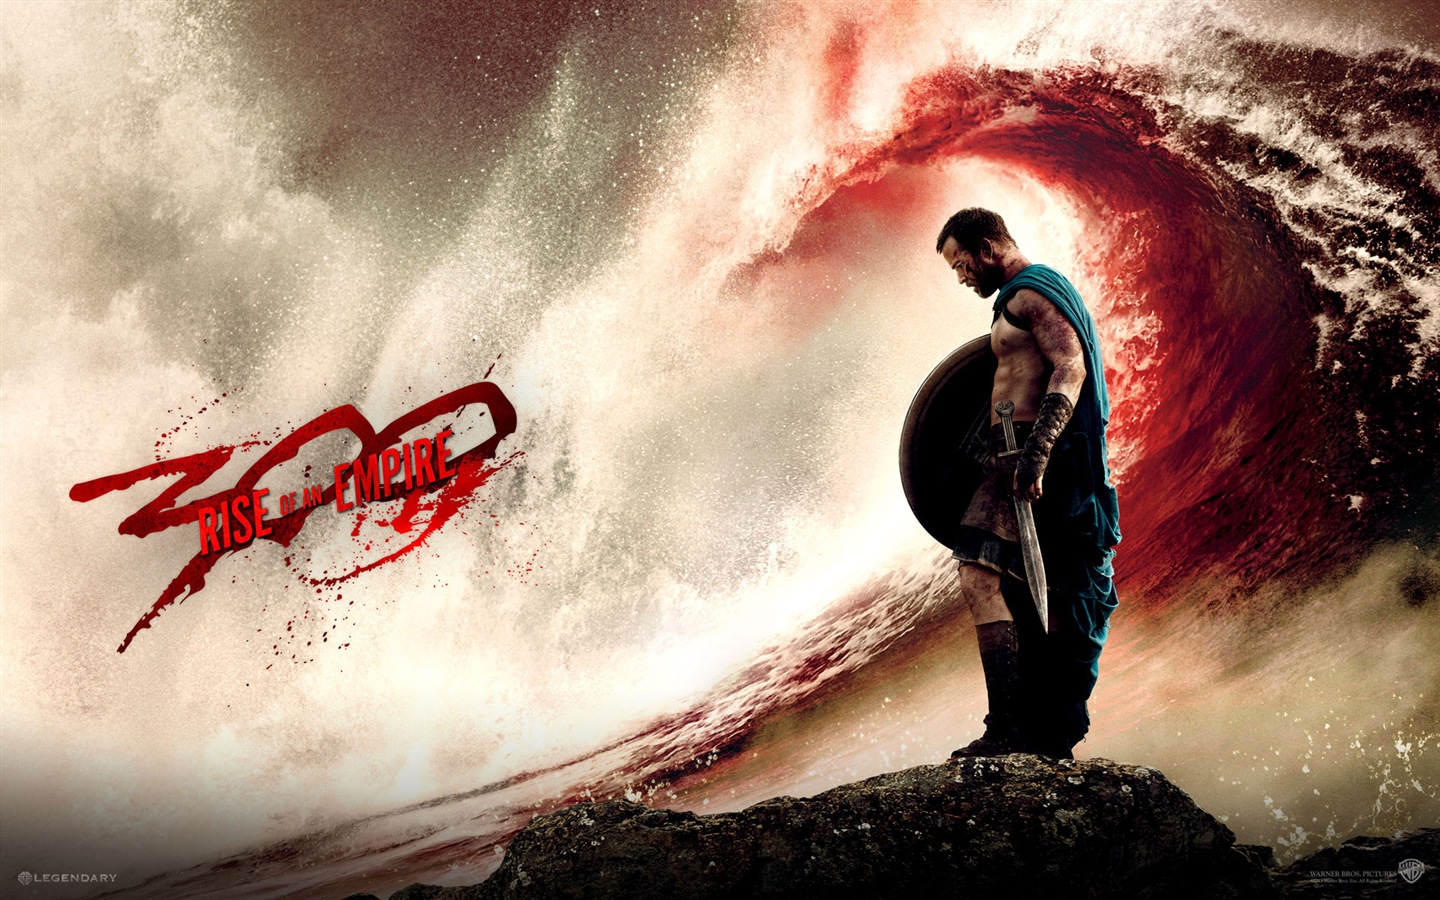 300: Rise of an Empire HD movie wallpapers #1 - 1440x900